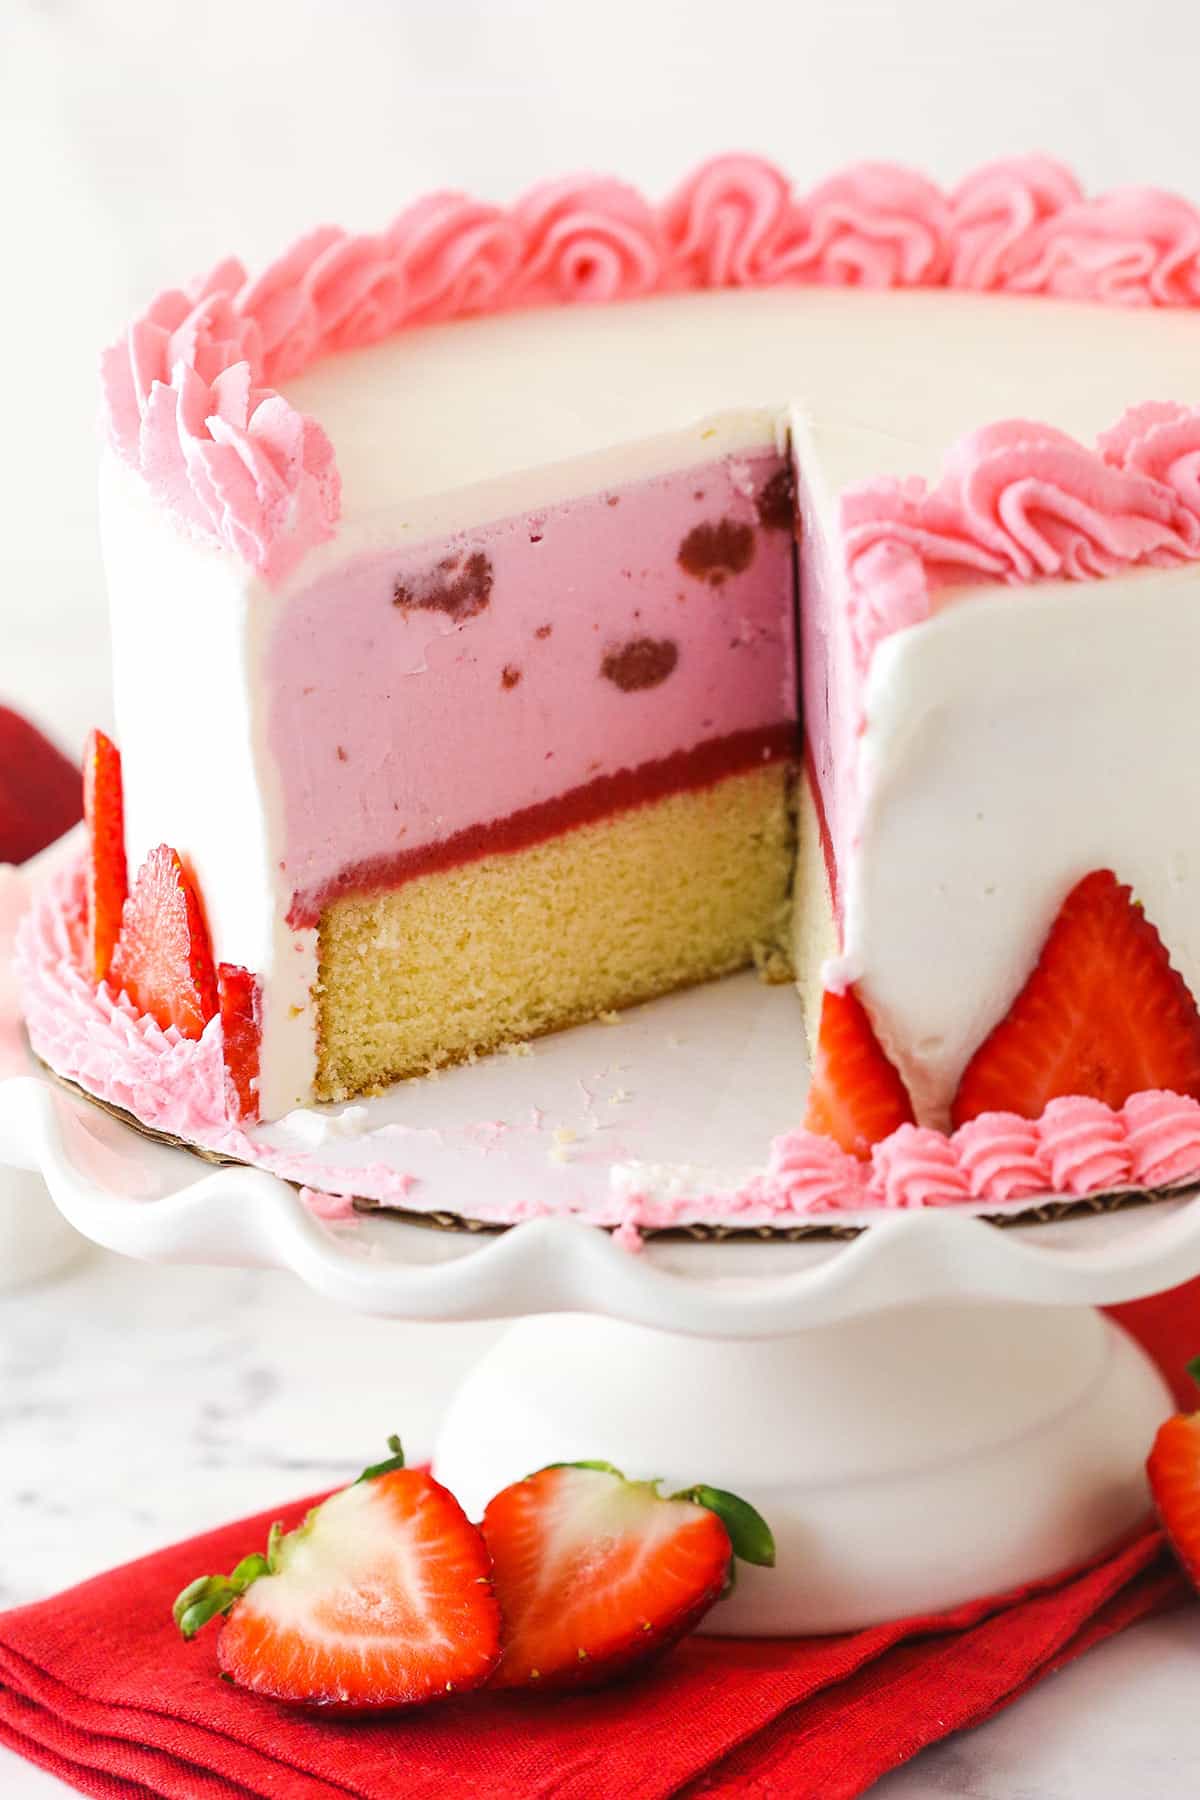 Strawberry ice cream cake on a cake stand with a couple of slices taken out of it.